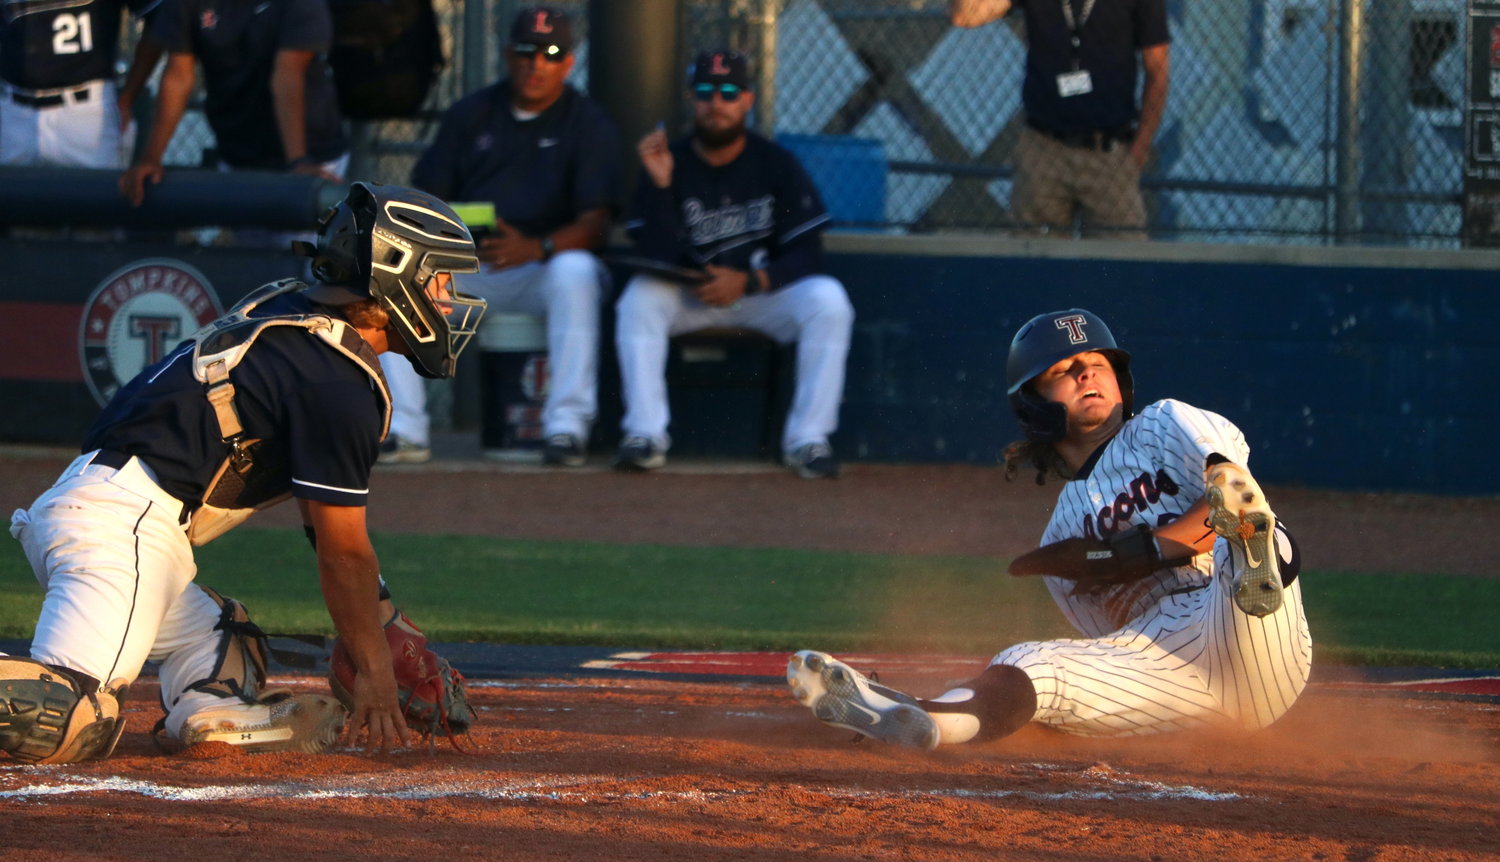 Ty Dagley steals home plate during Thursday’s Class 6A area round game between Tompkins and Lamar at the Tompkins baseball field.